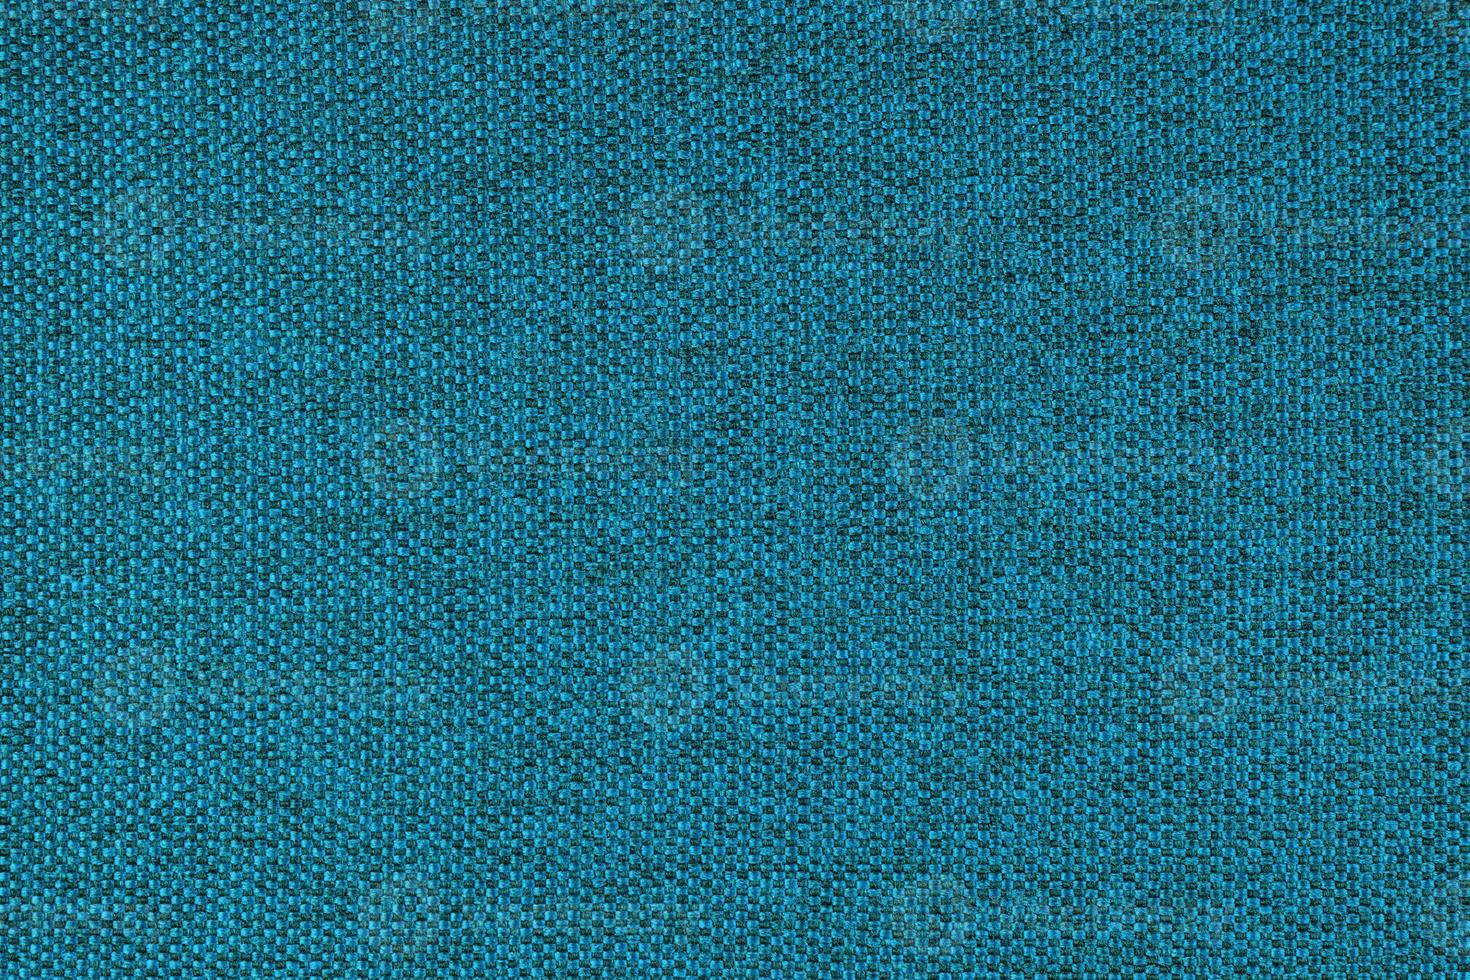 Close up texture of turquoise coarse weave upholstery fabric. Decorative textile background photo